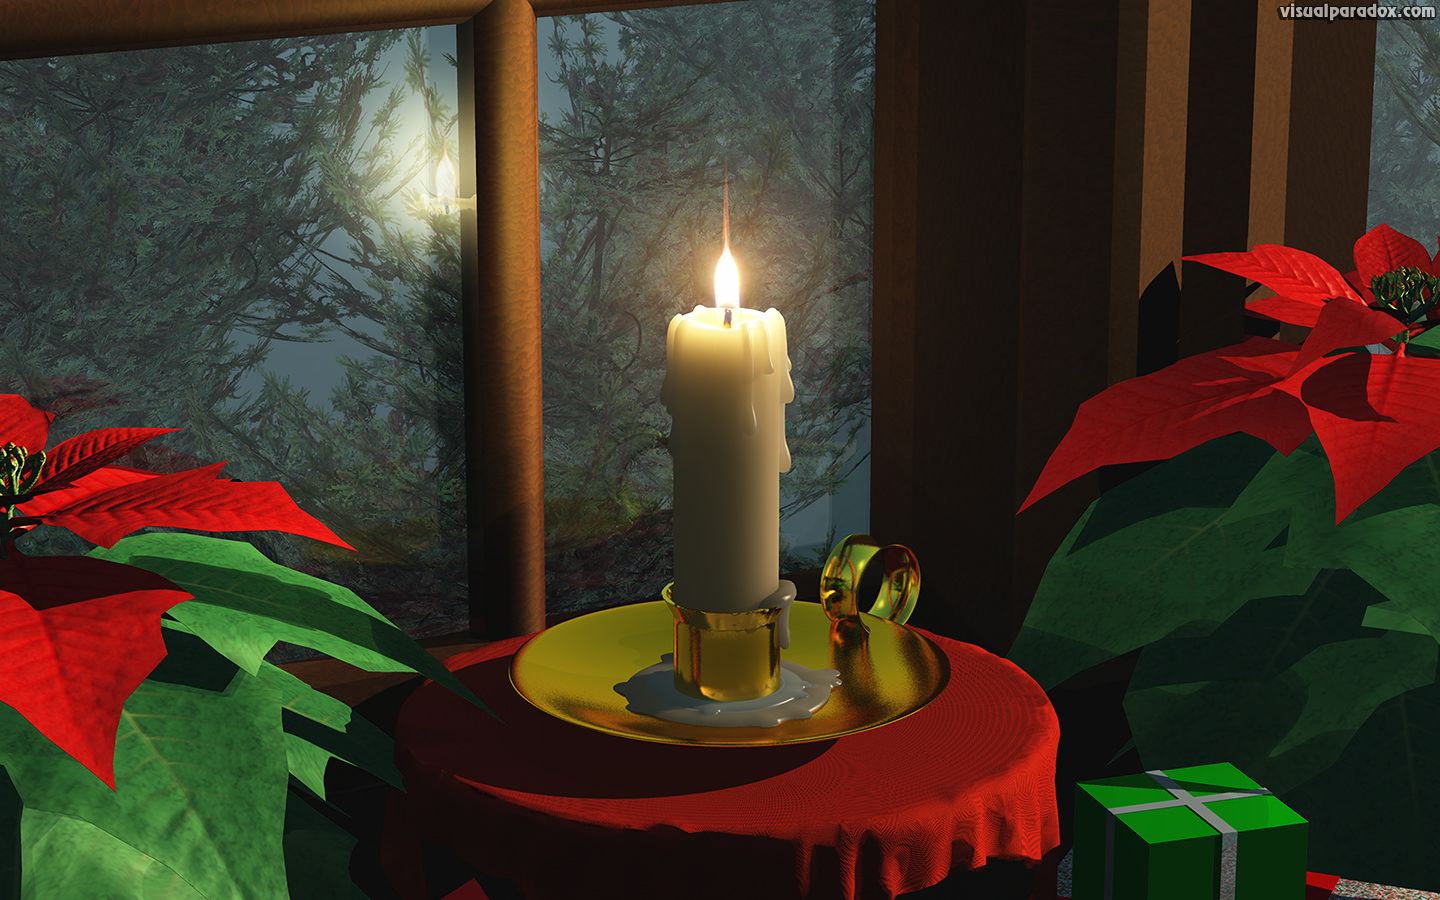 fire,flame, poinsettia, candlestick, beautiful, candle, candlelight, christmas, cold, december, decoration, evening, holiday, home, illumination, lamp, lantern, life, lighting, lights, magic, night, outdoor, red, seasonal, snow, snowy, still, window, winter, xmas, 3d, wallpaper